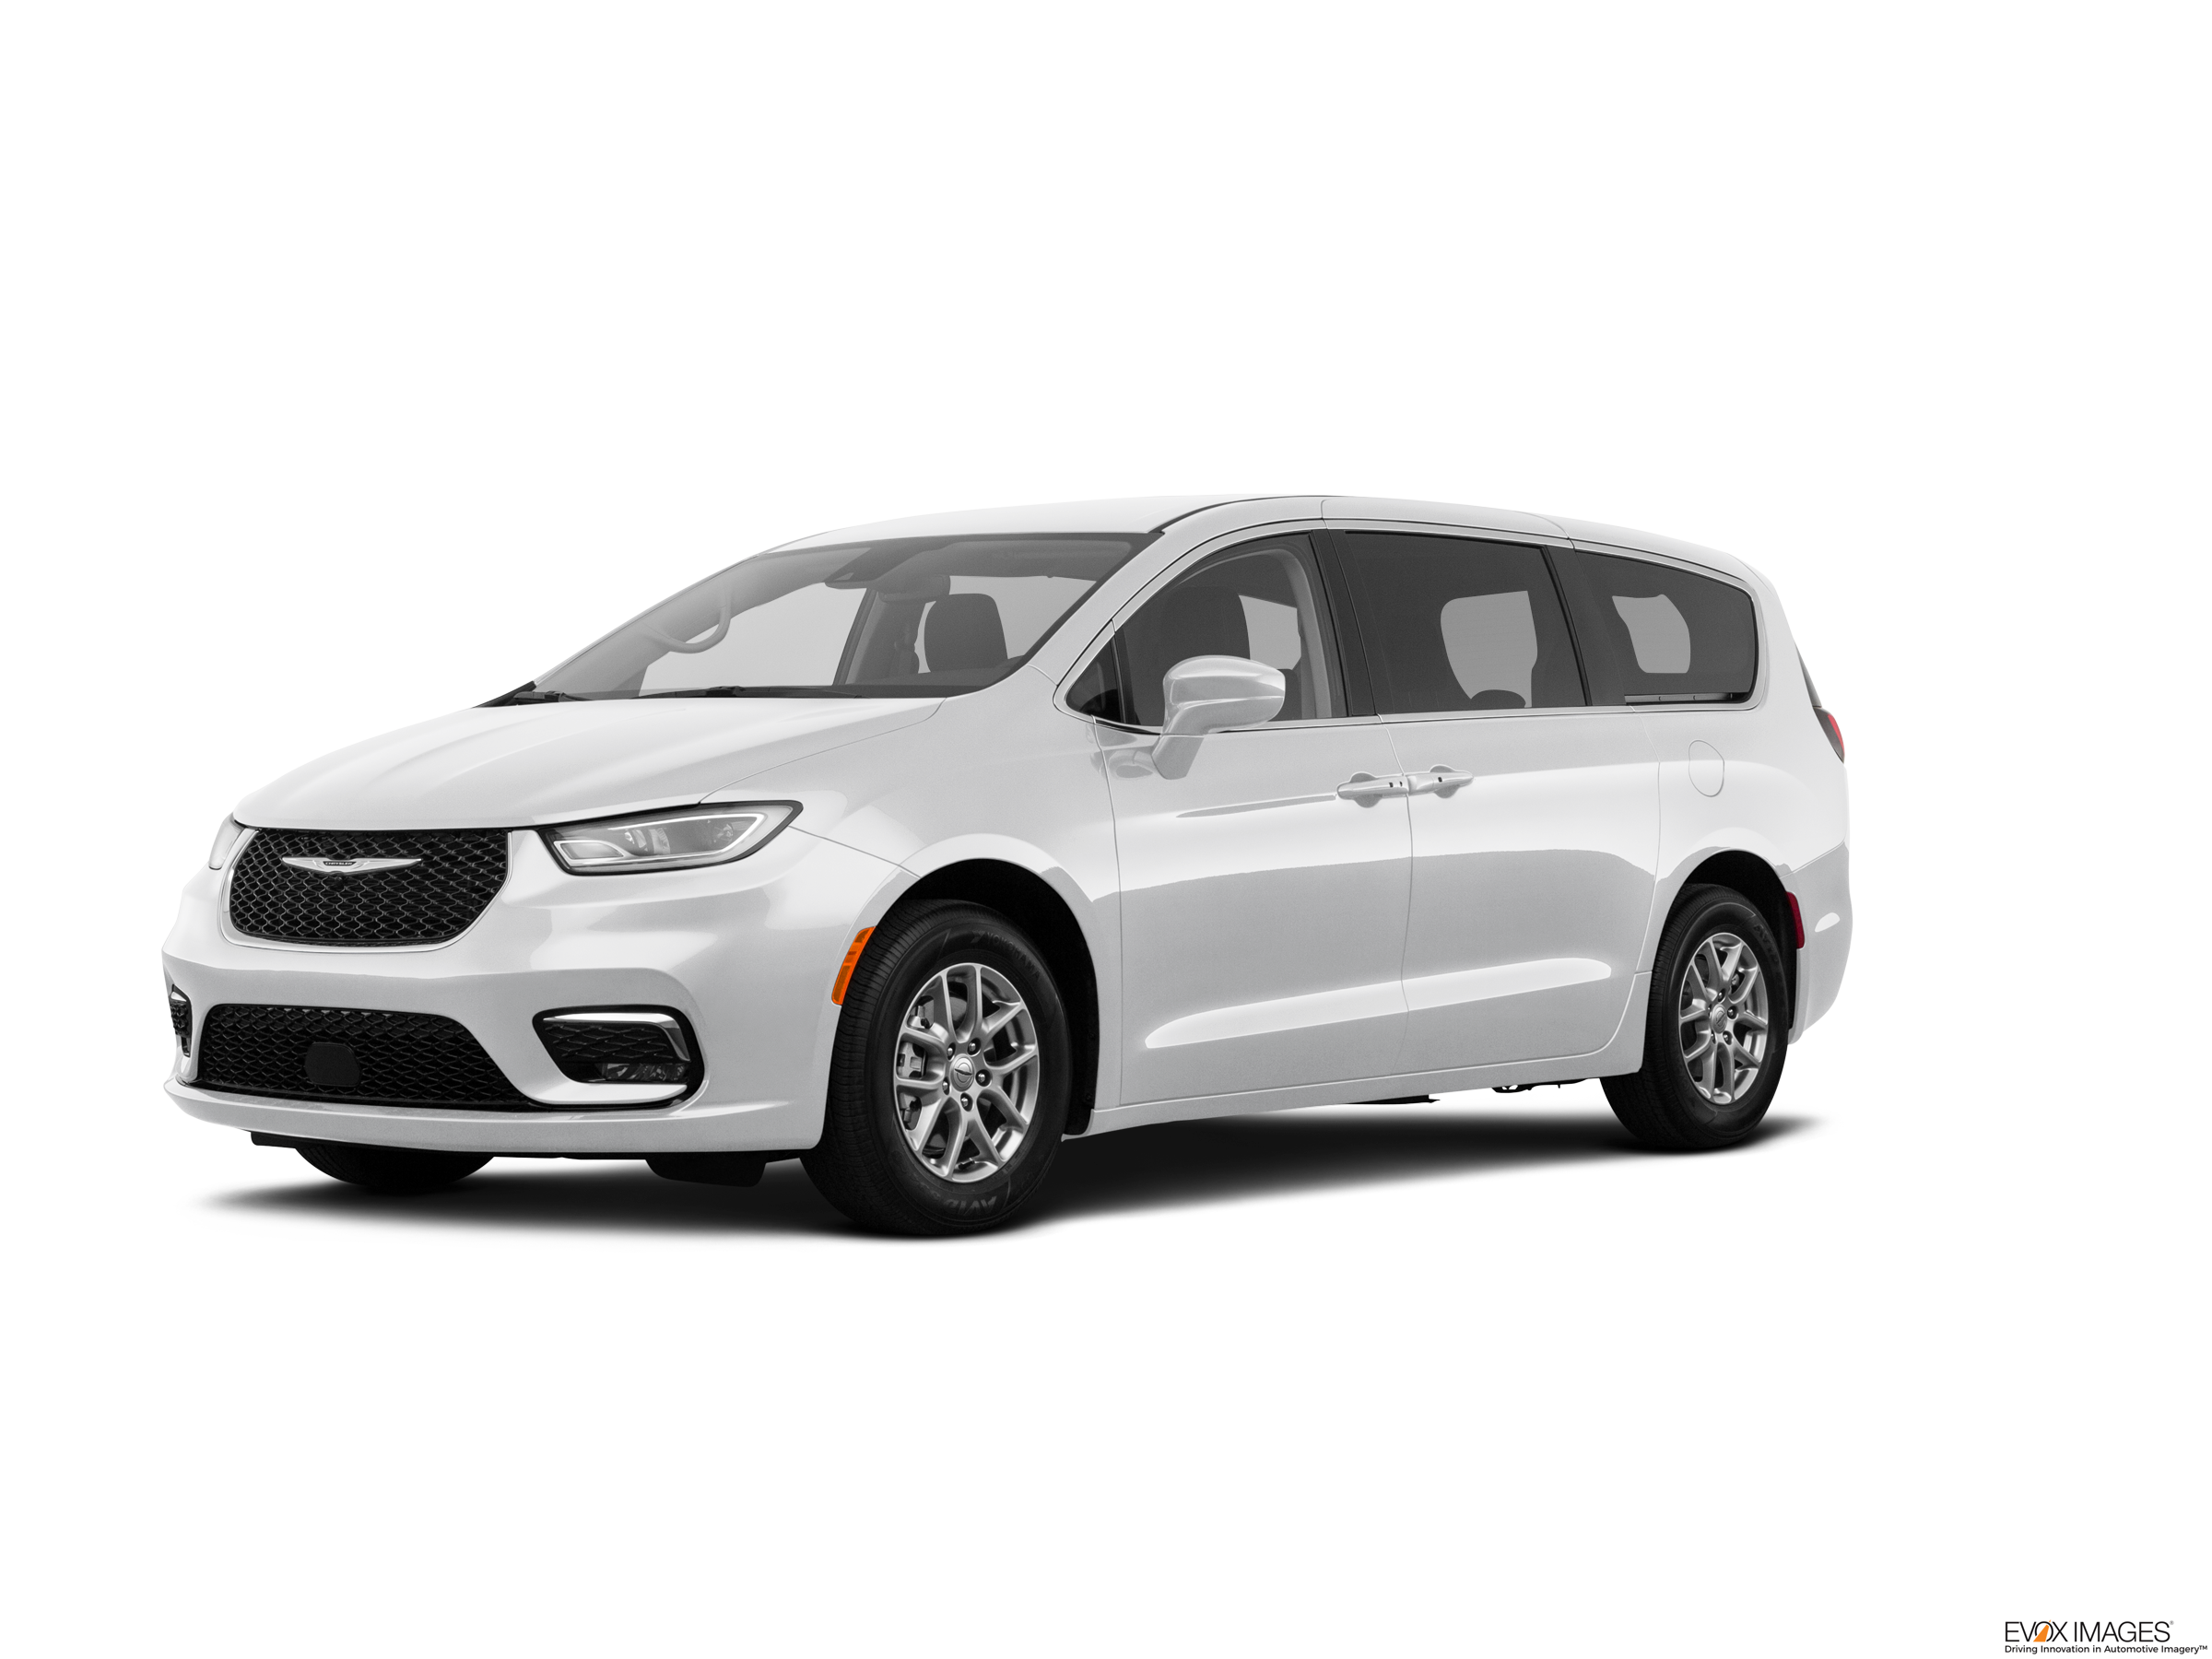 https://file.kelleybluebookimages.com/kbb/base/evox/CP/52189/2023-Chrysler-Pacifica-front_52189_032_2400x1800_PW7.png